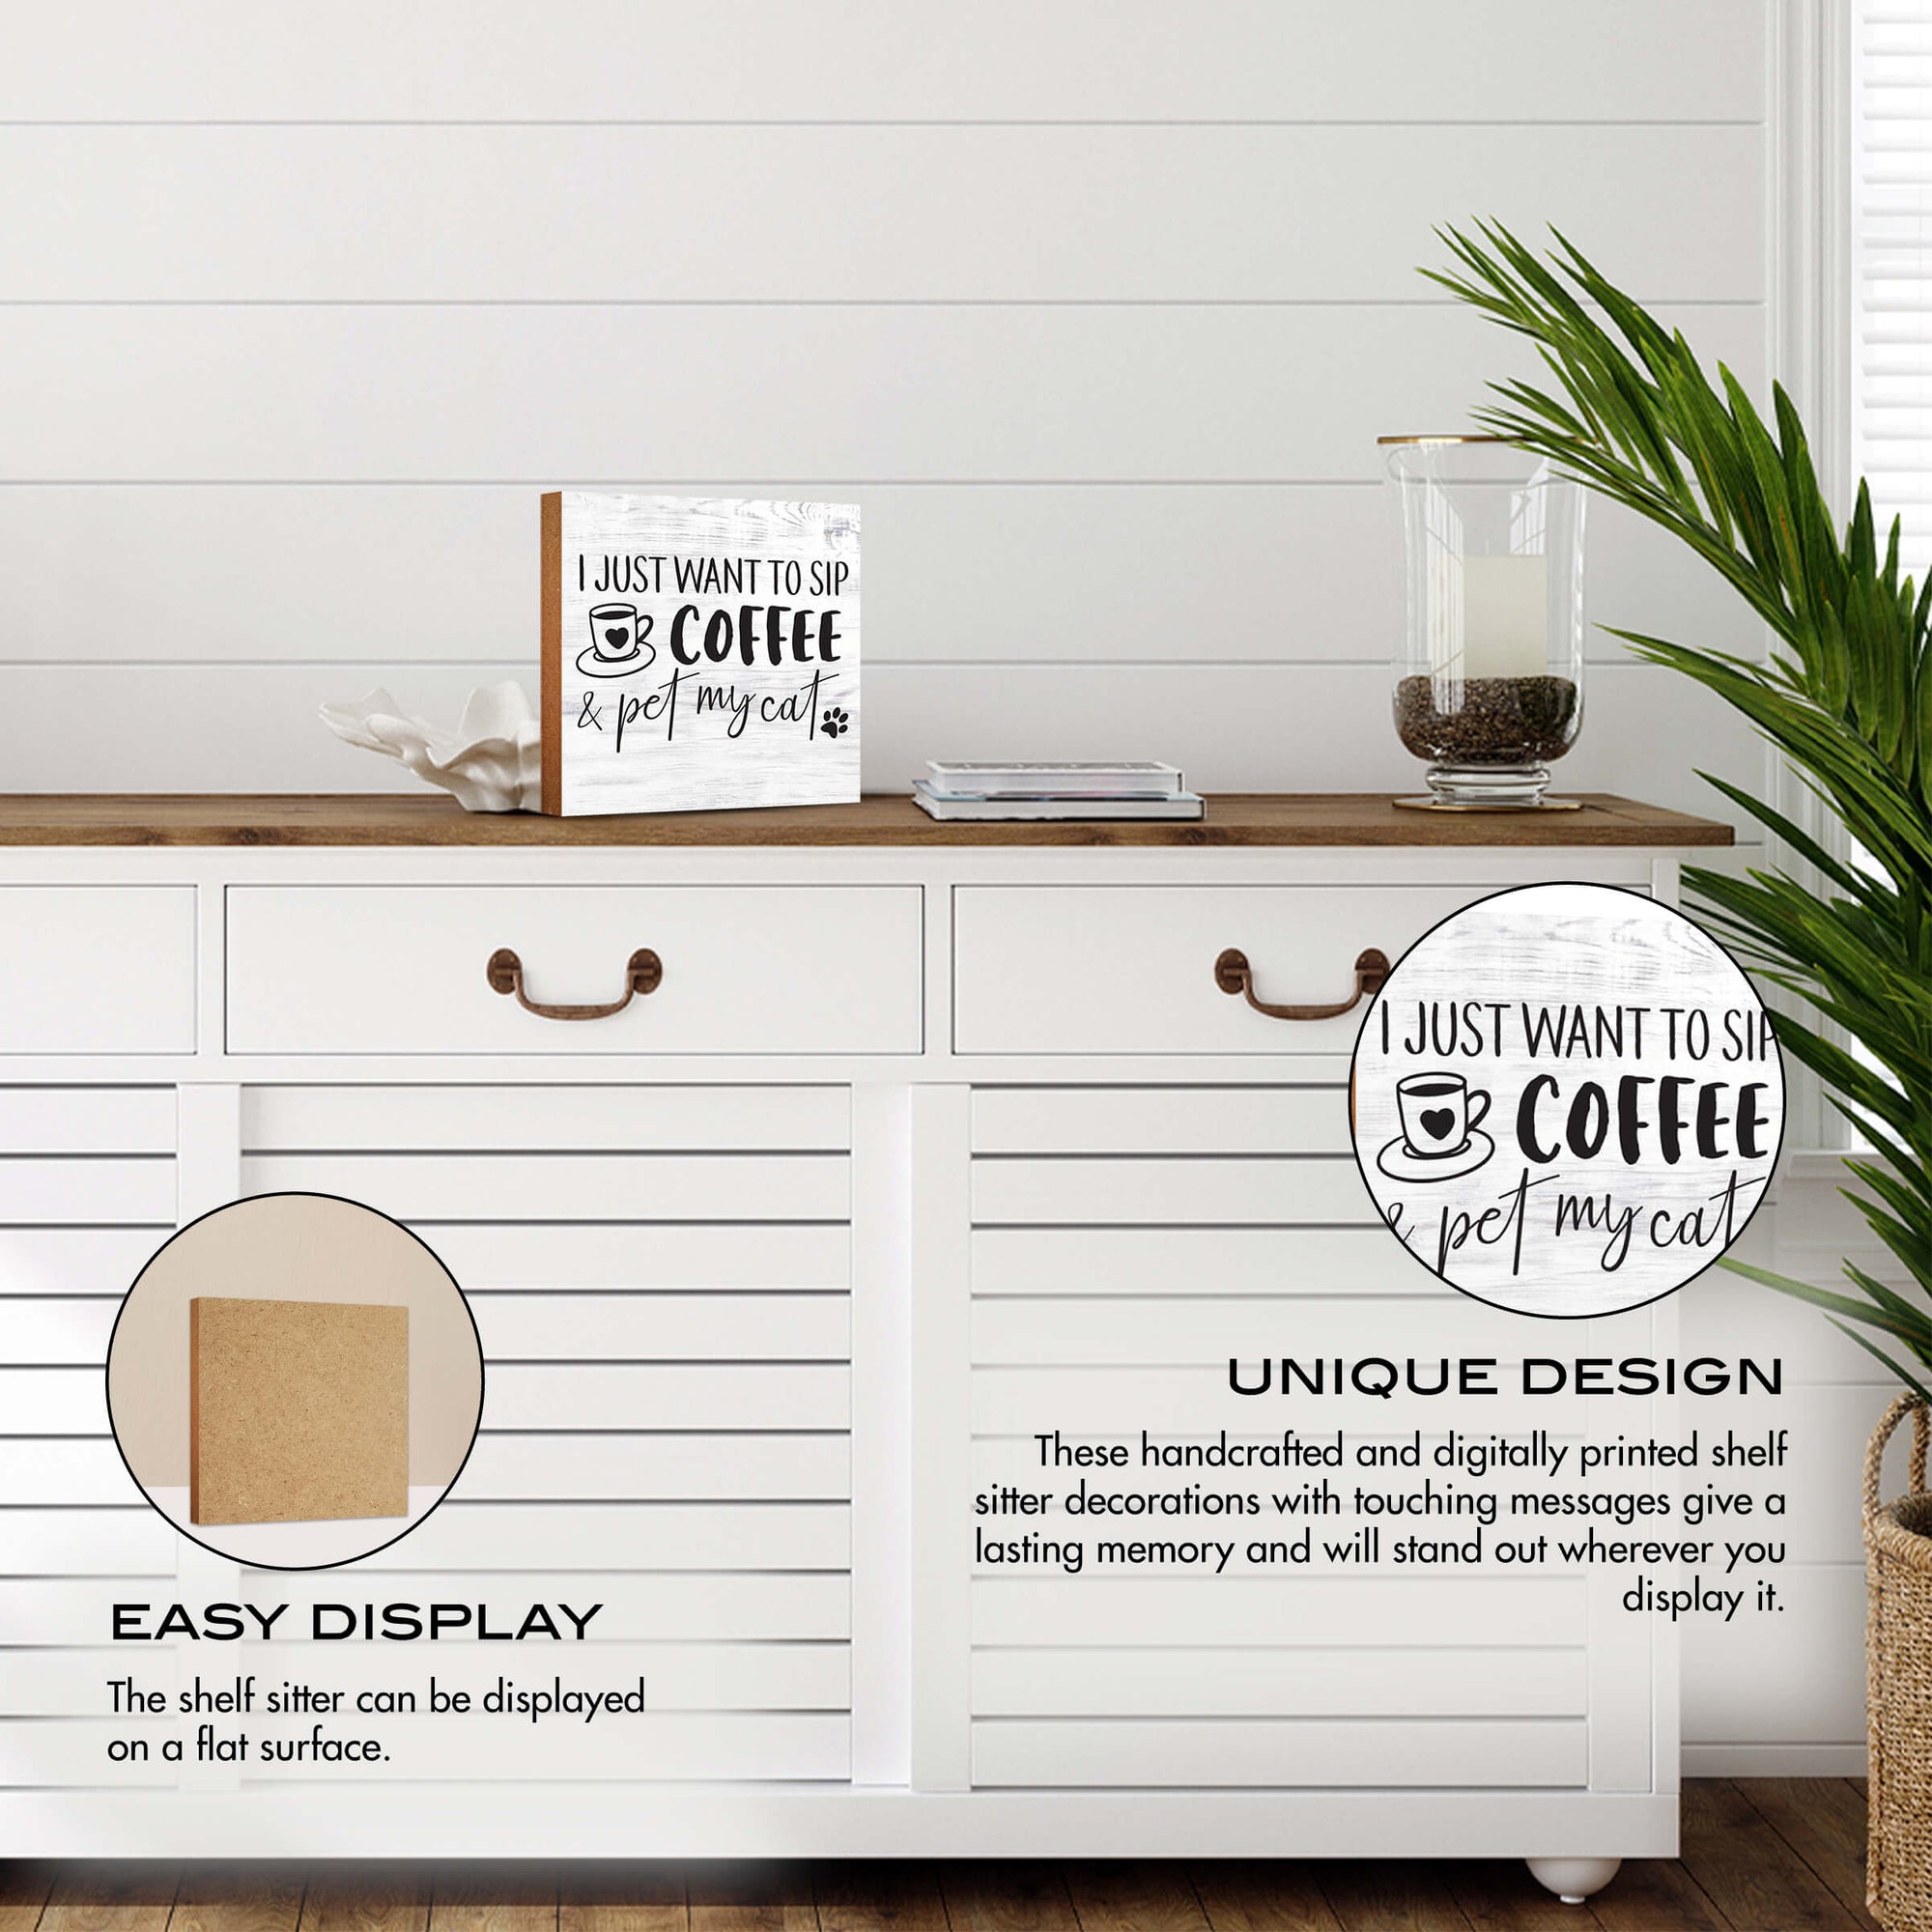 Wooden Shelf Decor and Tabletop Signs with Pet Verses - Pet My Cat